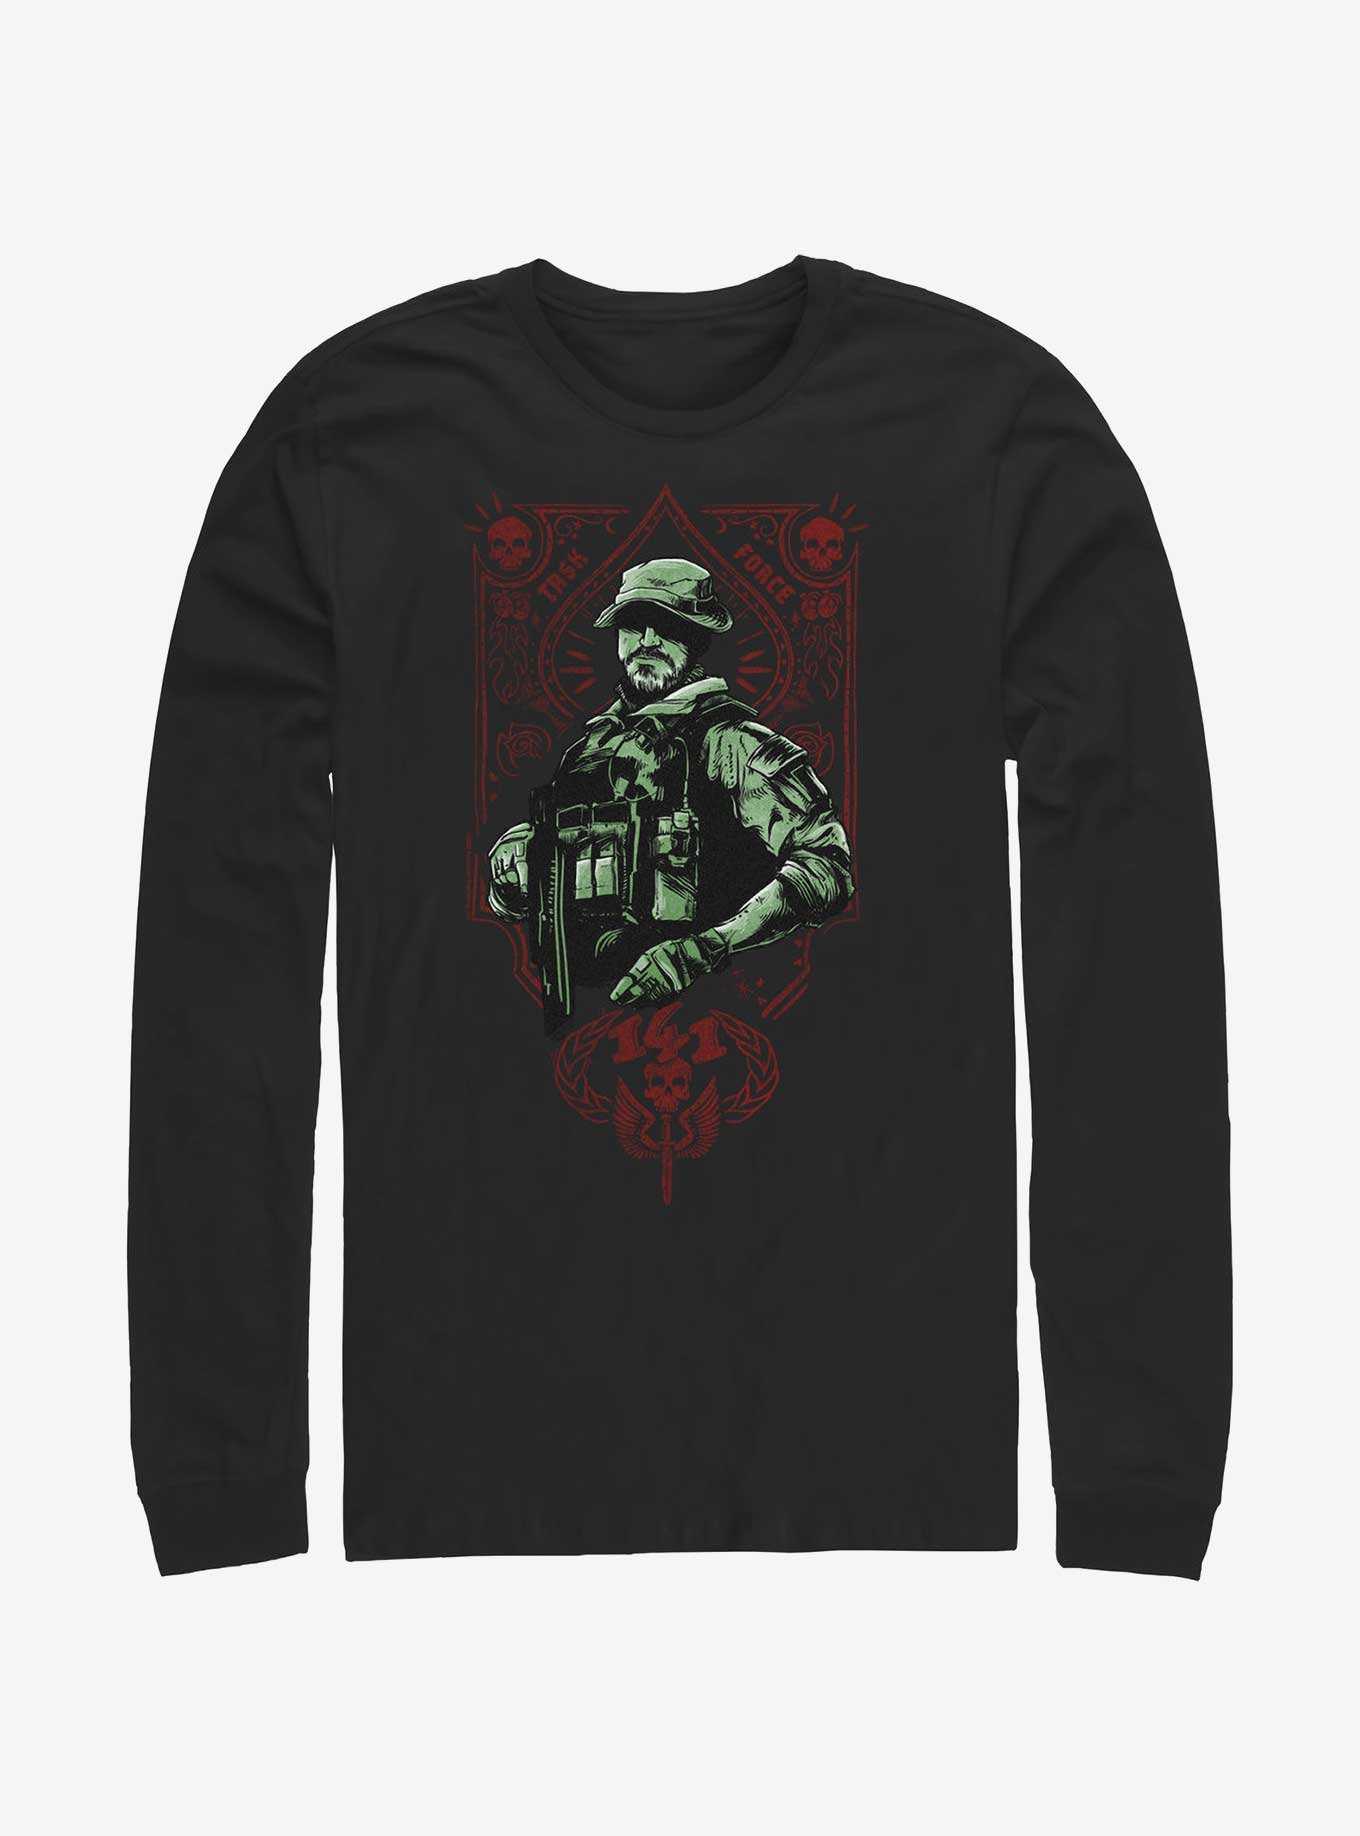 Call of Duty Cartel Price Long-Sleeve T-Shirt, , hi-res